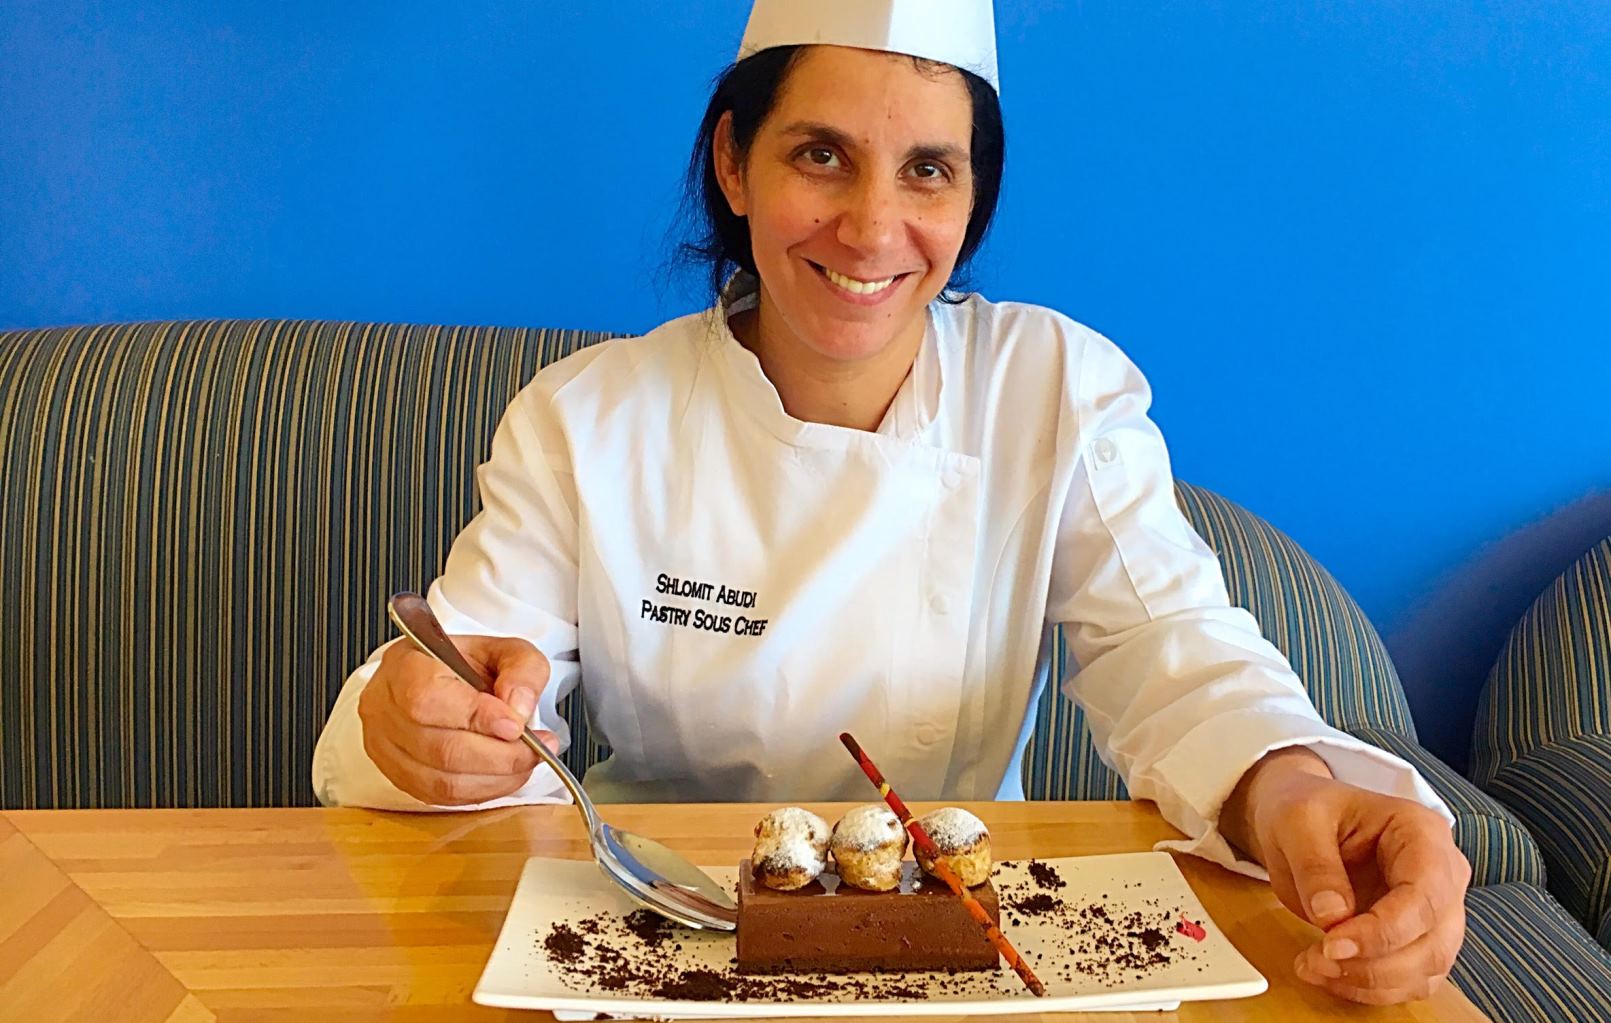 Tel Aviv Hilton pastry chef Shlomit Abudi garnished her Chocolate Marquis with creampuffs. Photo: courtesy